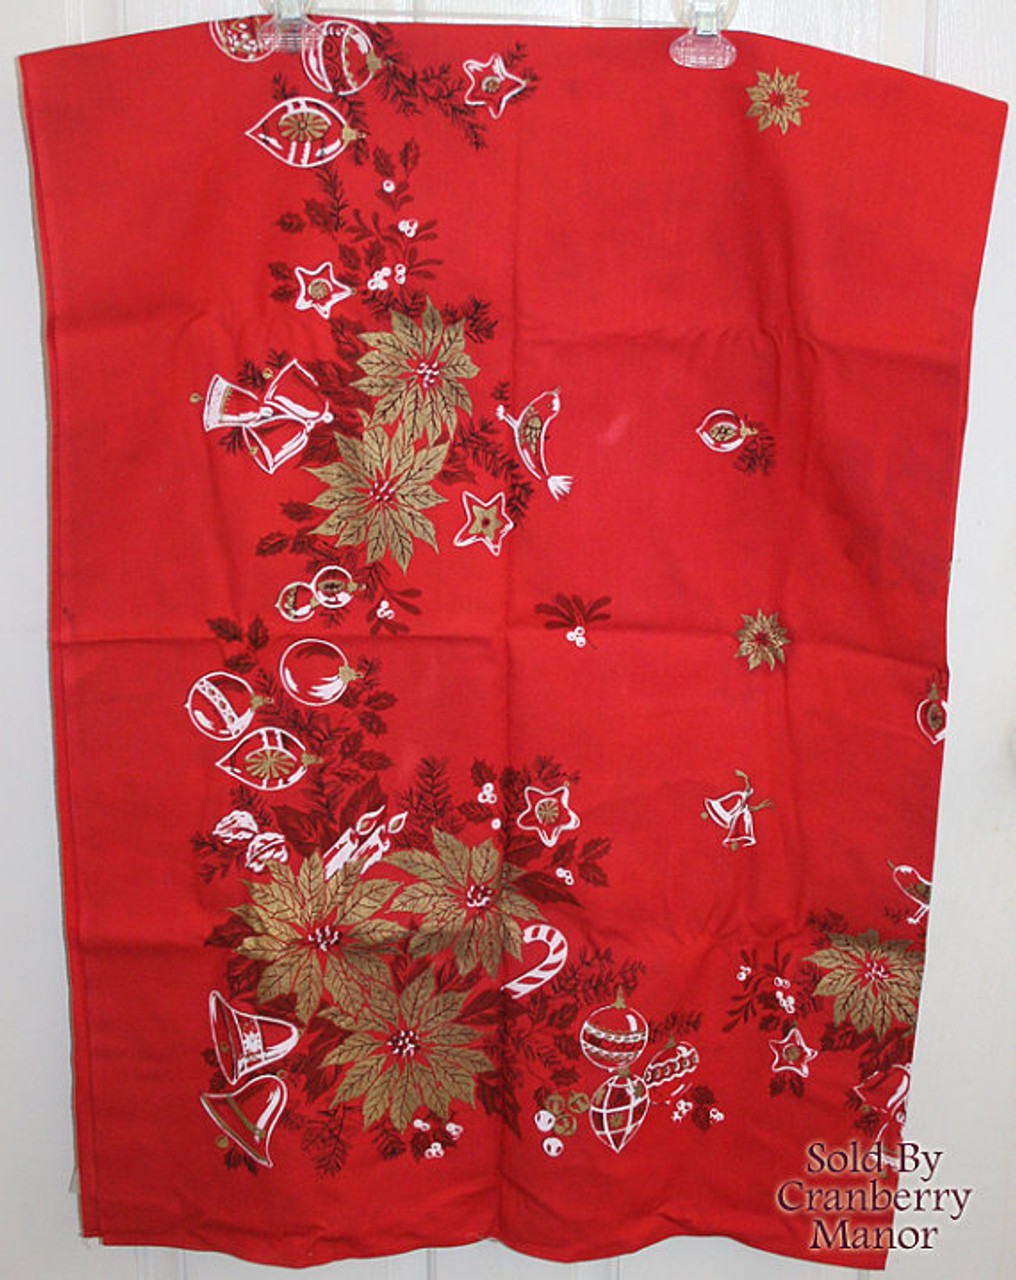 Parisian Prints Christmas Red & Gold Poinsettia Tablecloth Vintage Mid  Century 1950s Designer Linens Gift